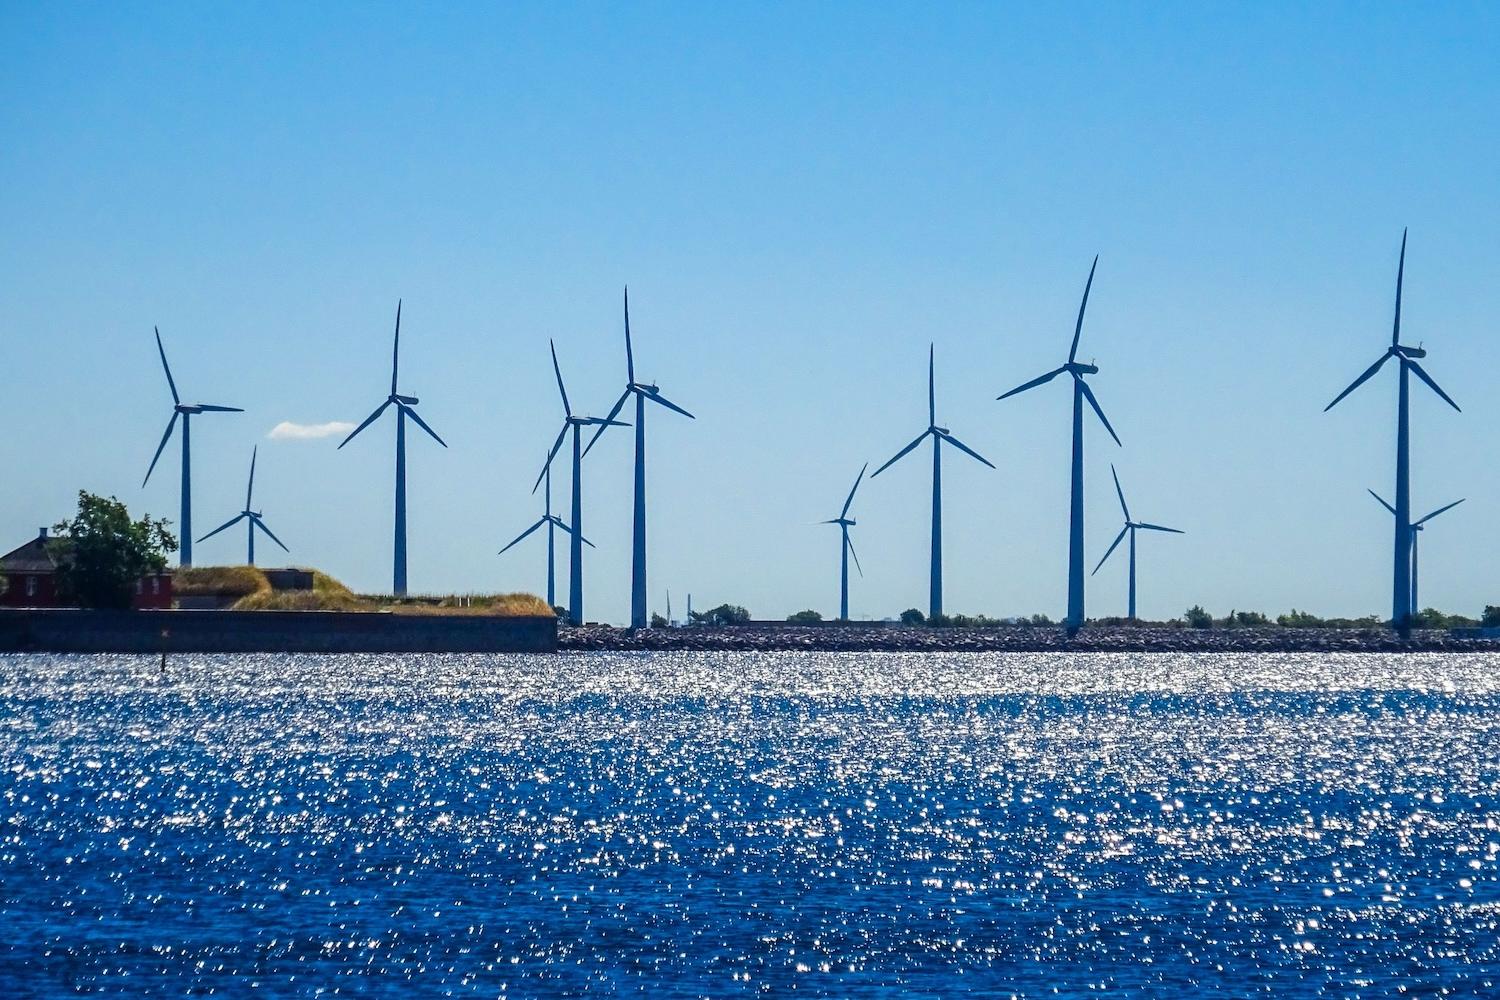 Ohmium looks to make green hydrogen from seawater at offshore wind farms - climate solutions with potential